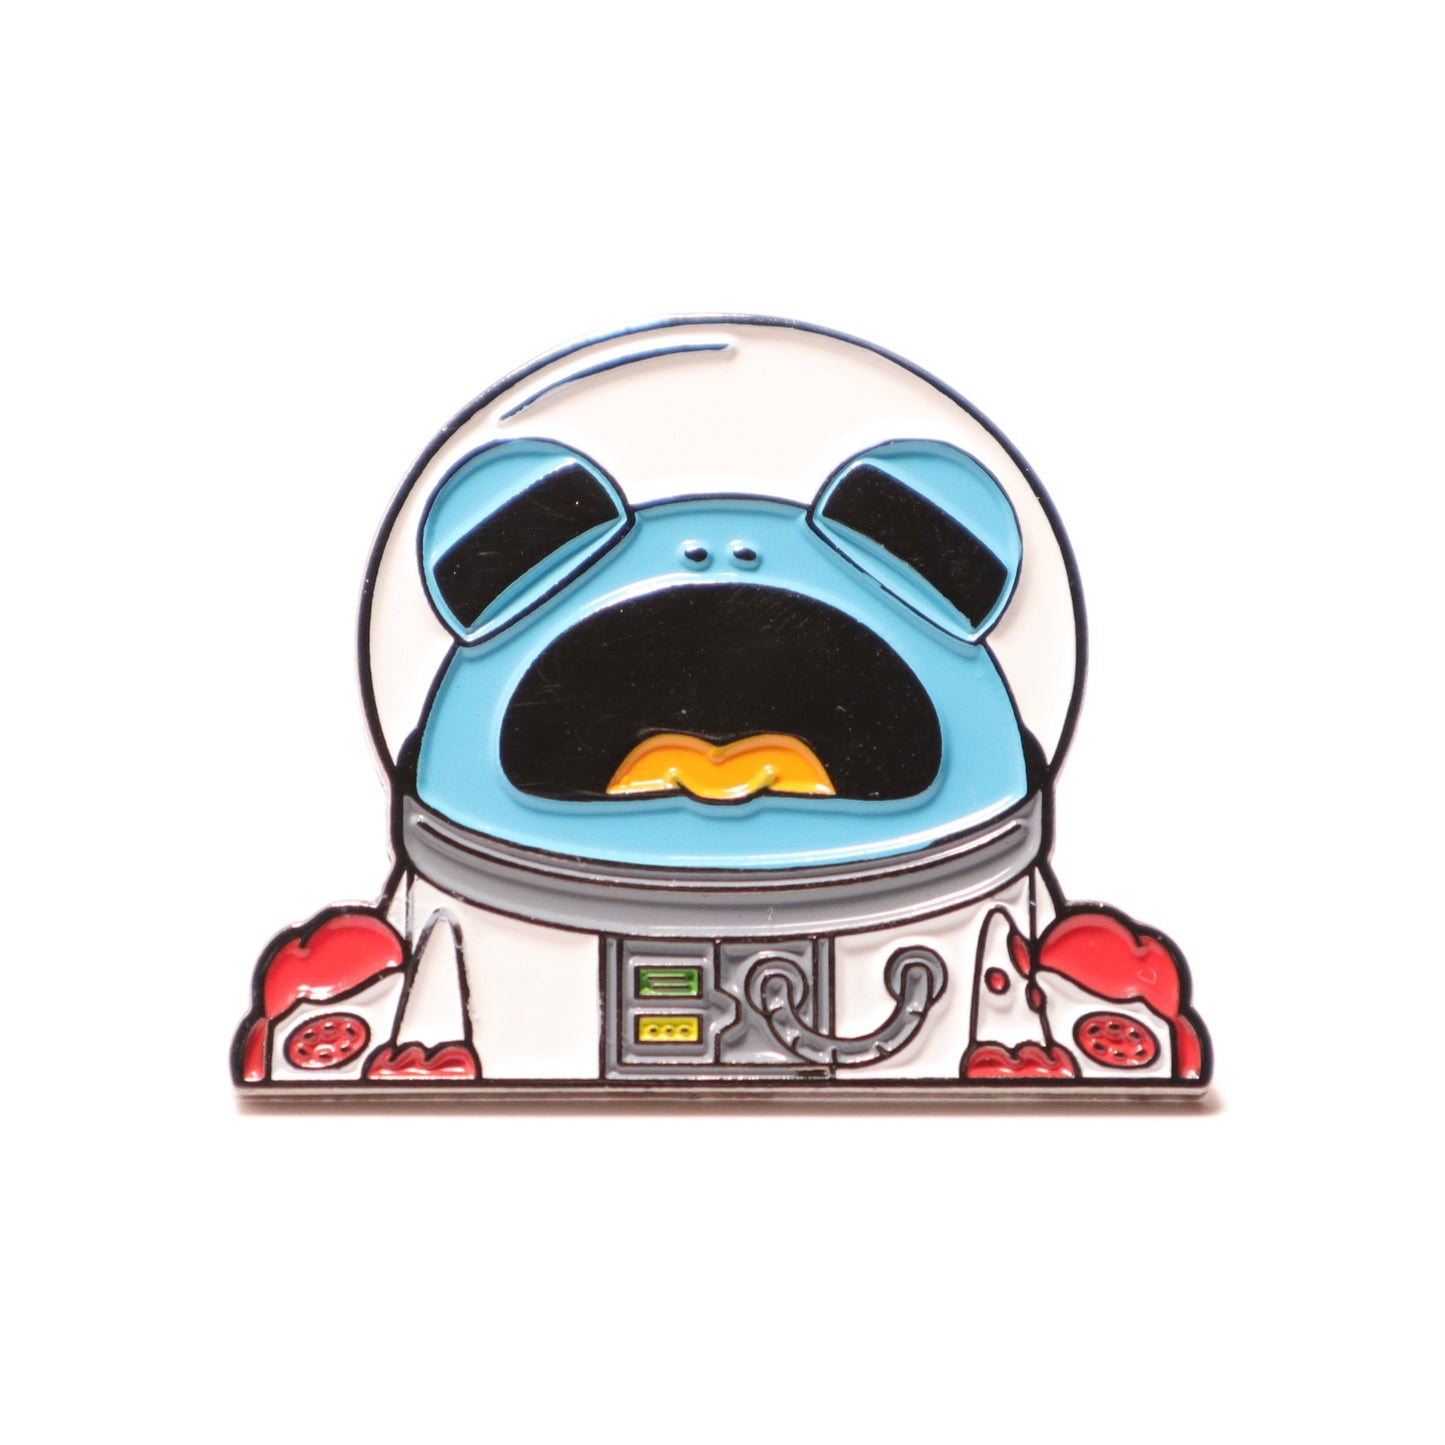 Astro Frog (White Suit) - Ributt the Frog Enamel Pin